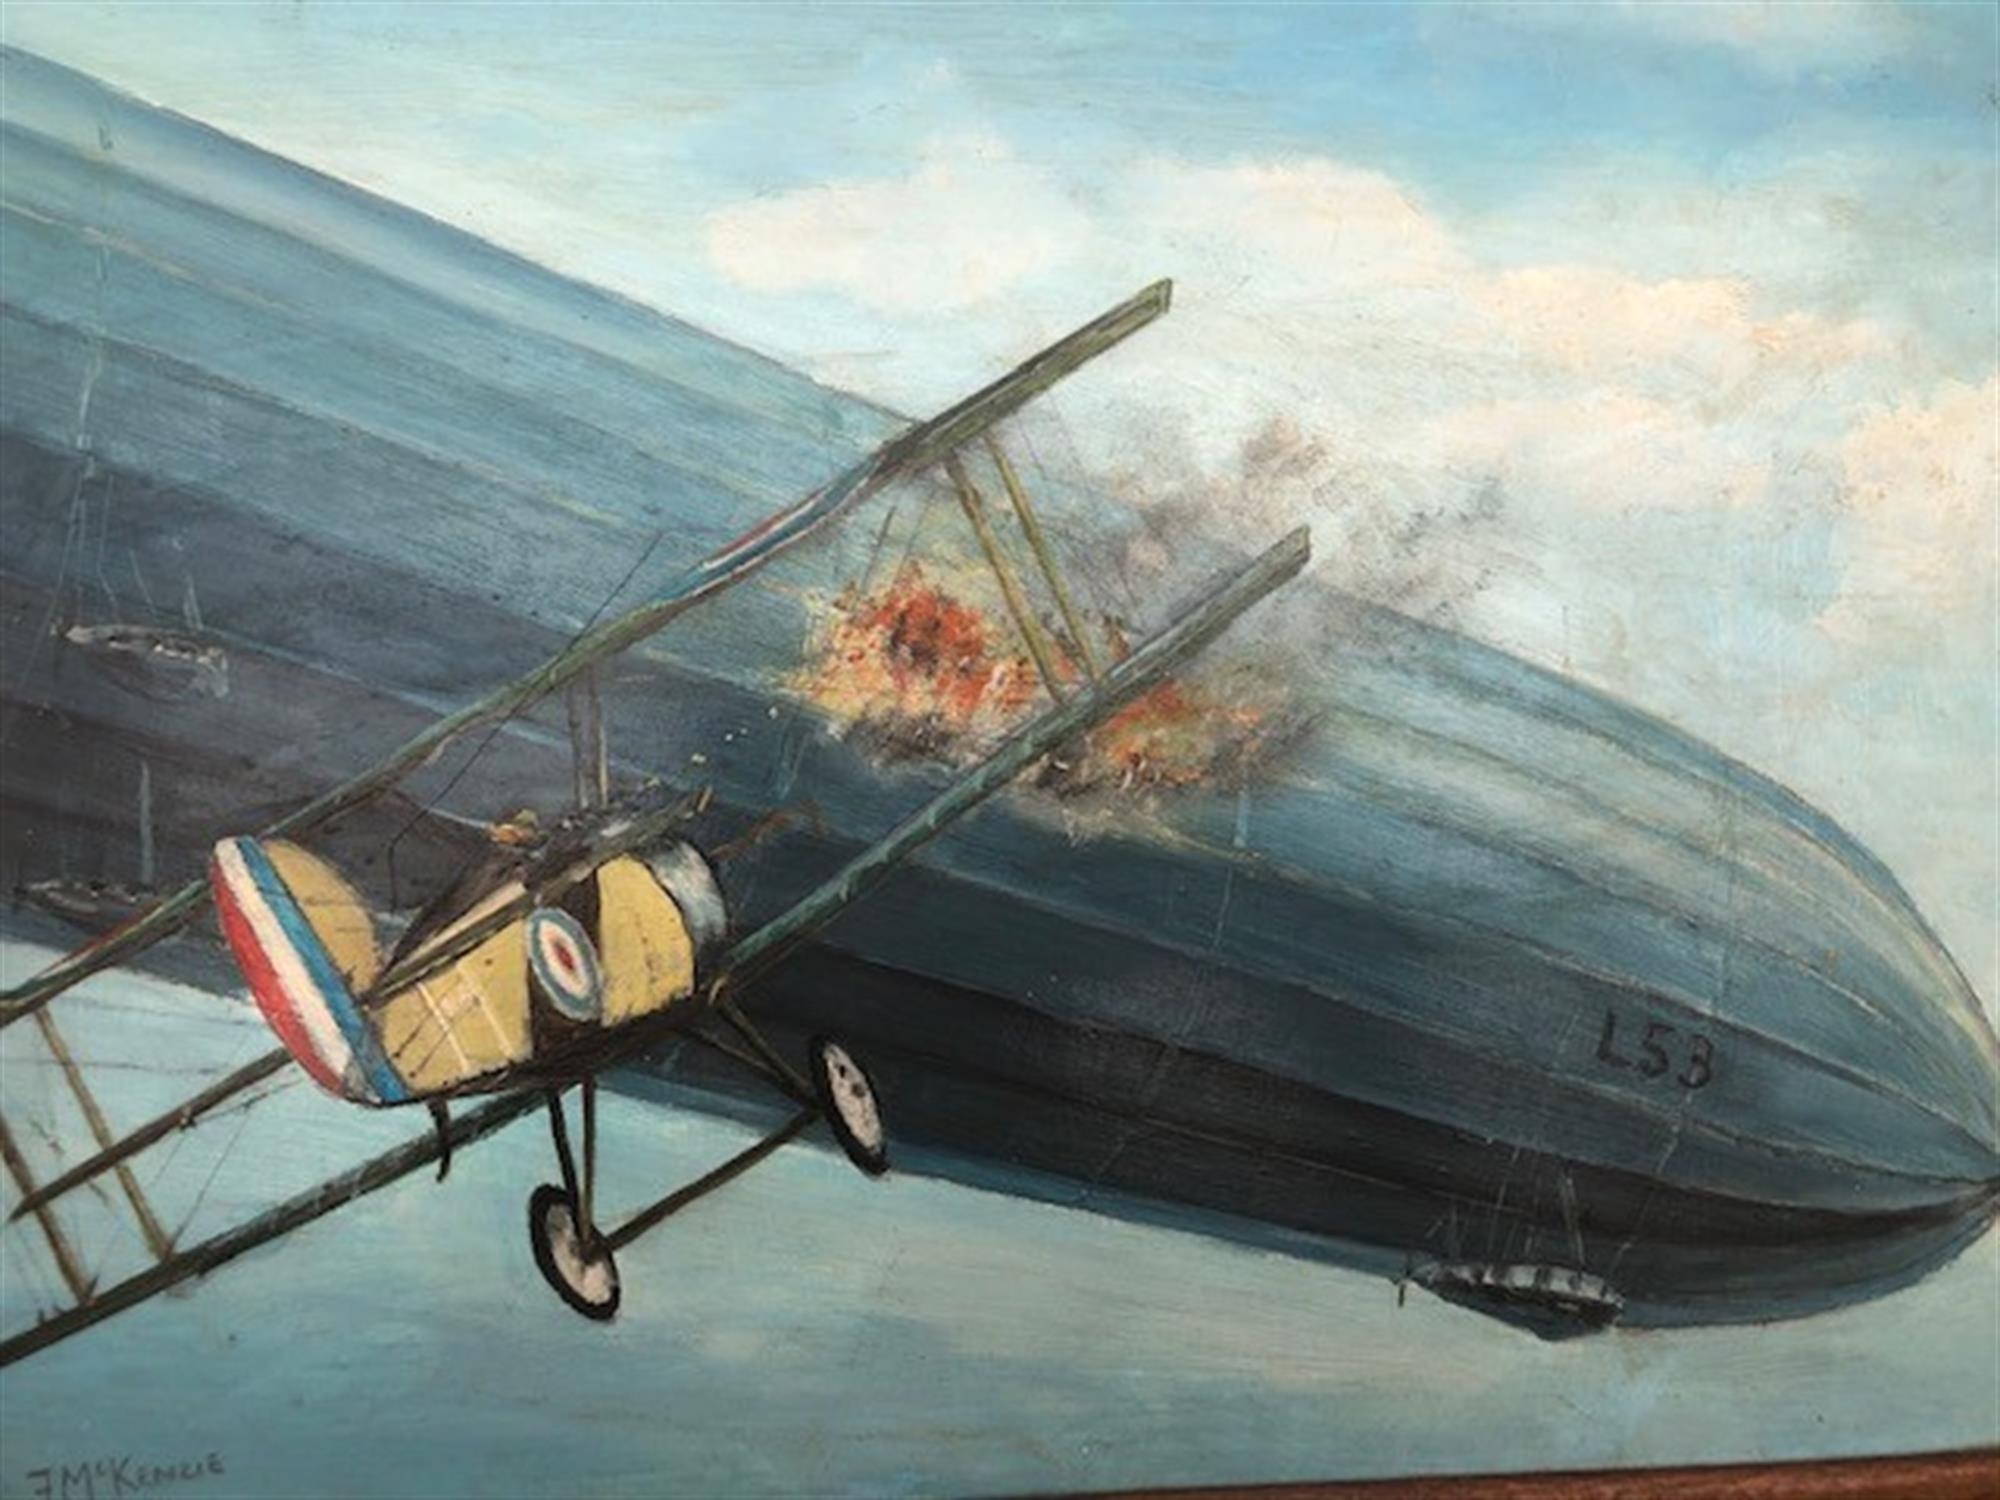 Sopwith Camel biplane attacking the WWI Zeppelin Airship L53. - Image 3 of 5